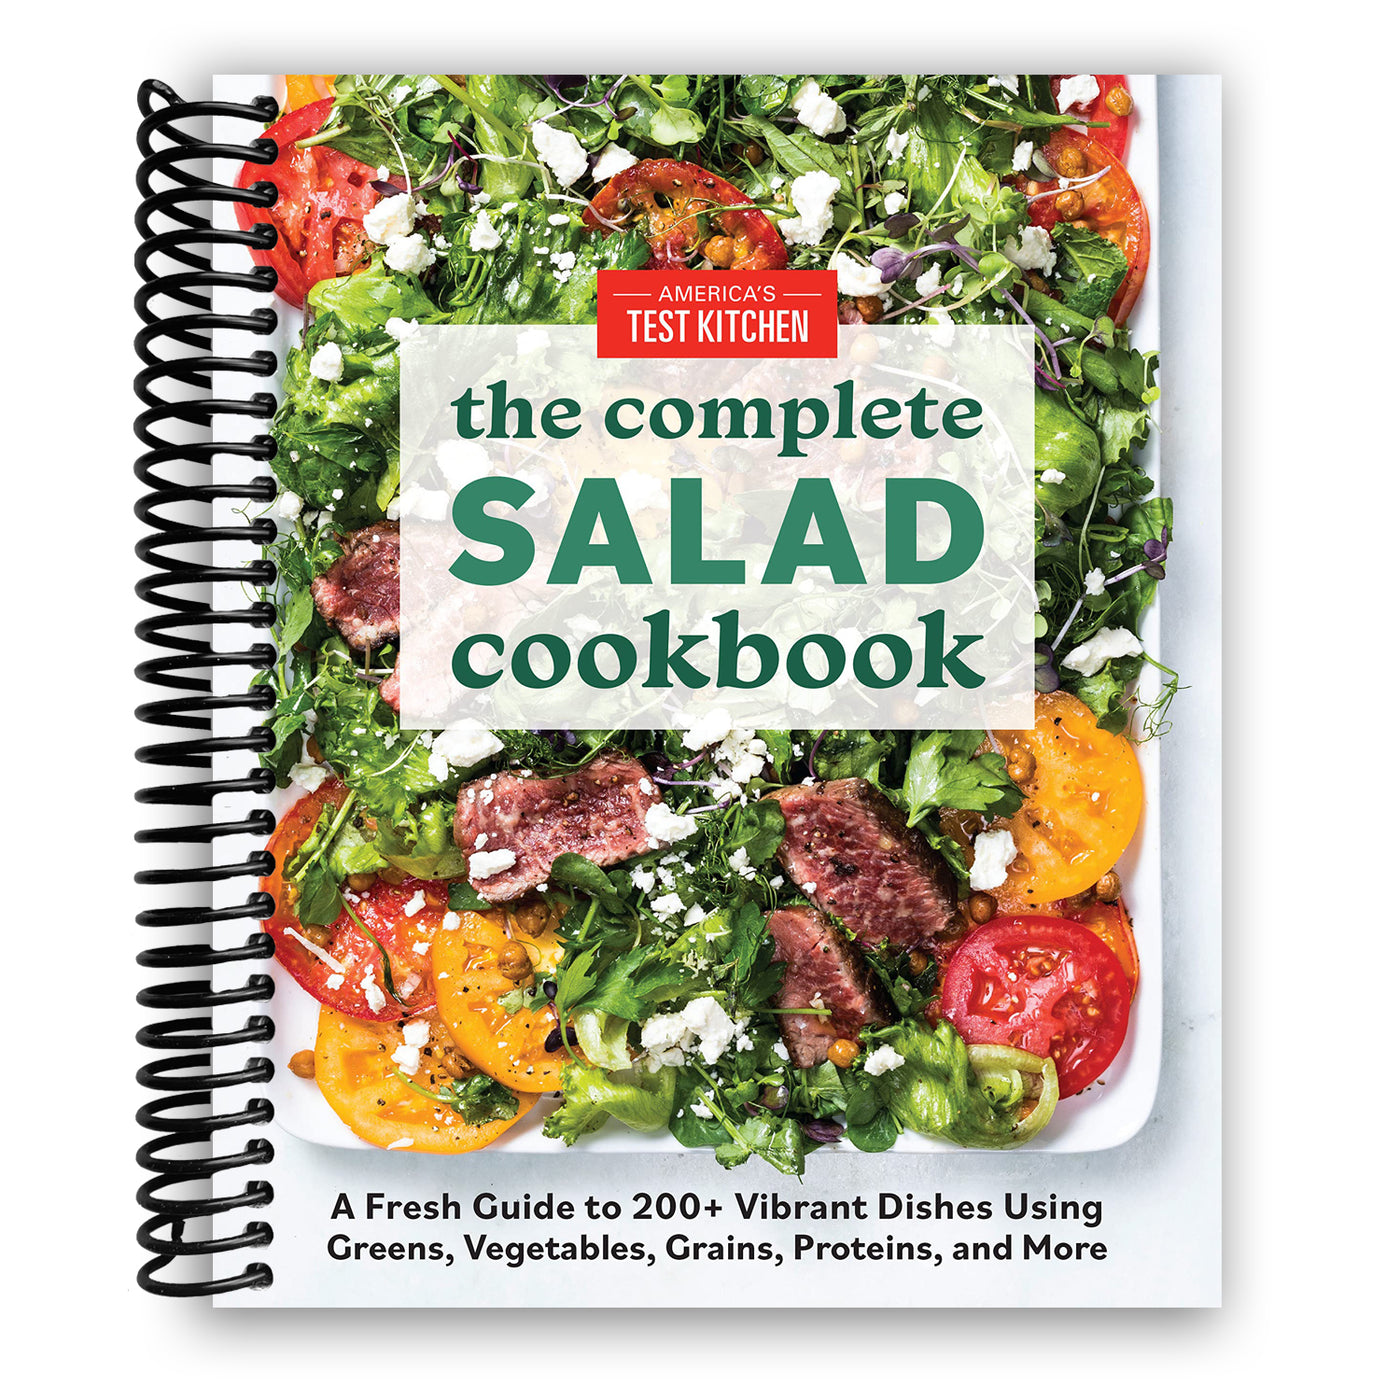 The Complete Salad Cookbook: A Fresh Guide to 200+ Vibrant Dishes Using Greens, Vegetables, Grains, Proteins, and More (Spiral Bound)